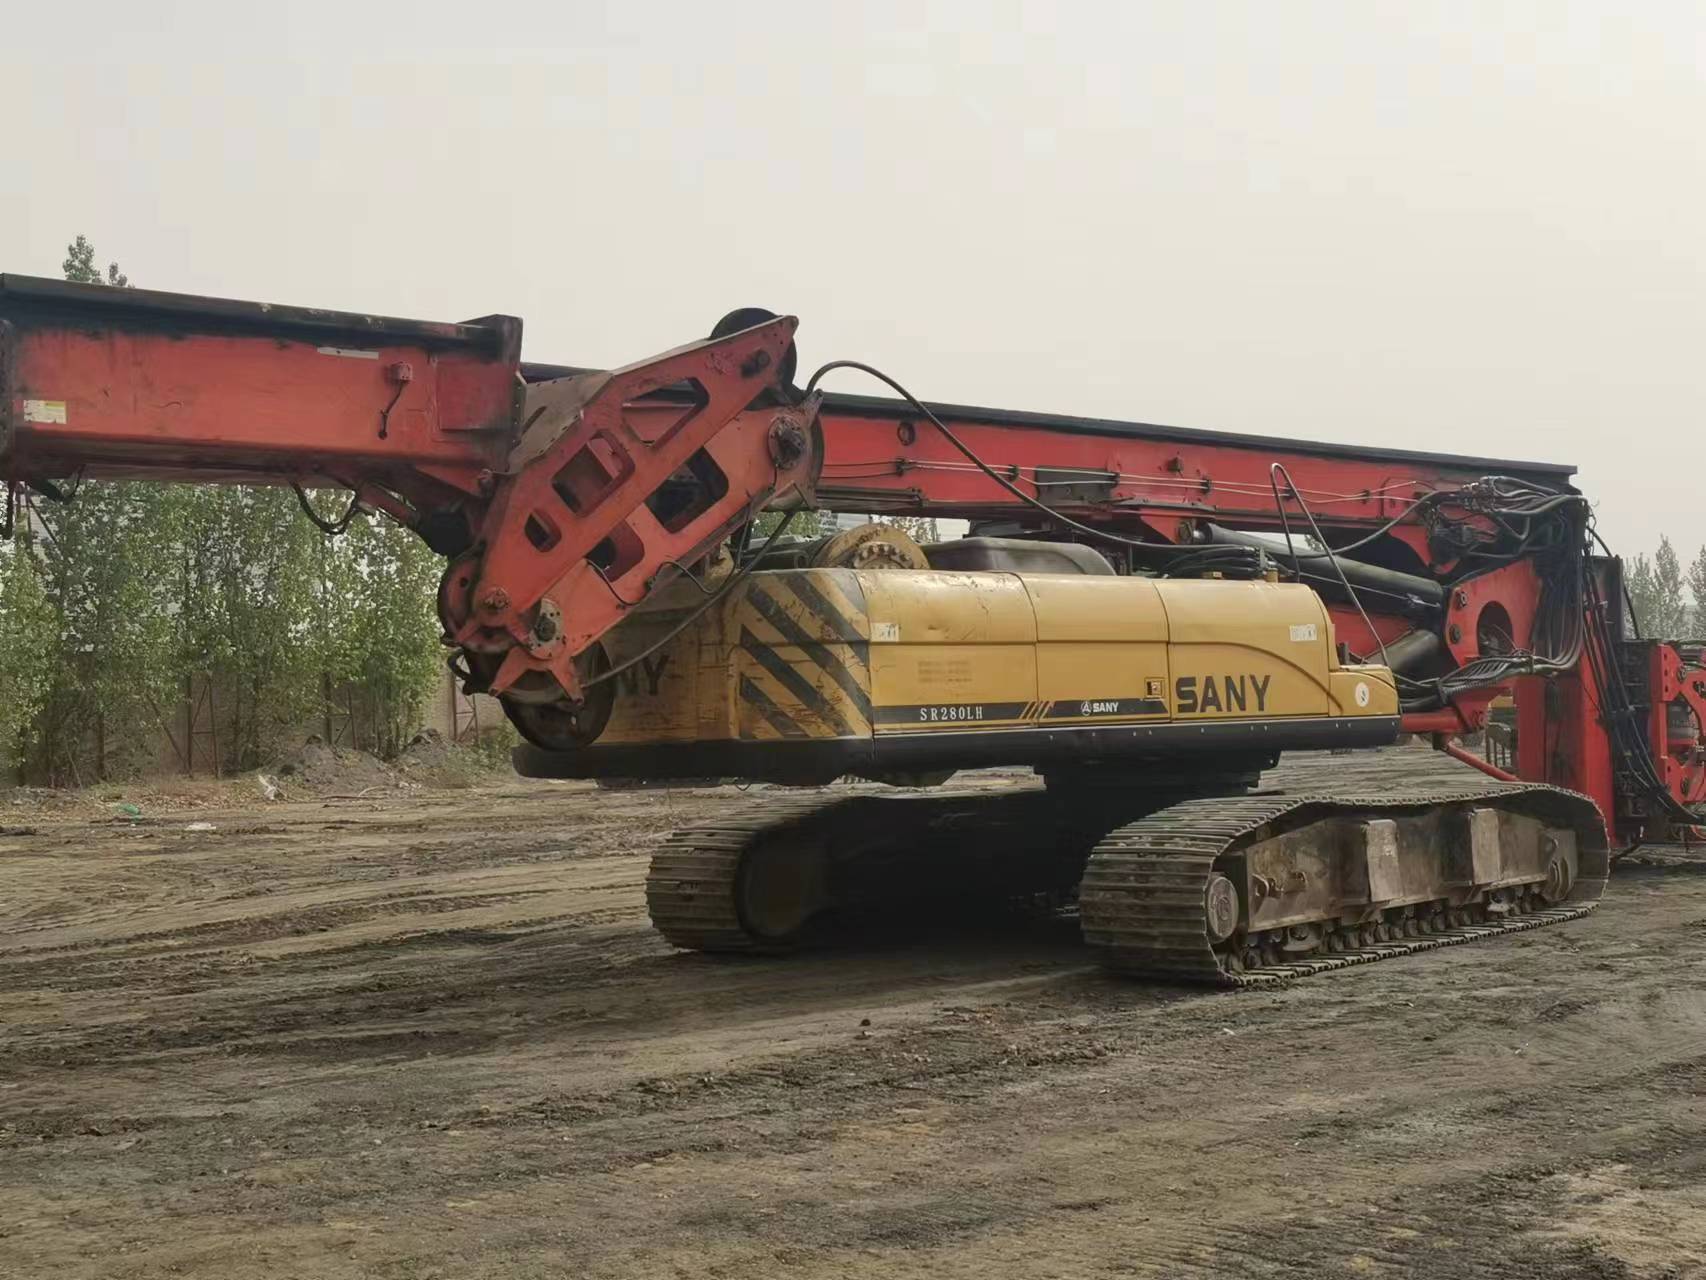 Used SANY SR280 China Pile Driver Price Mobile Portable Rotary Drilling Rig for various large-scale projects 9